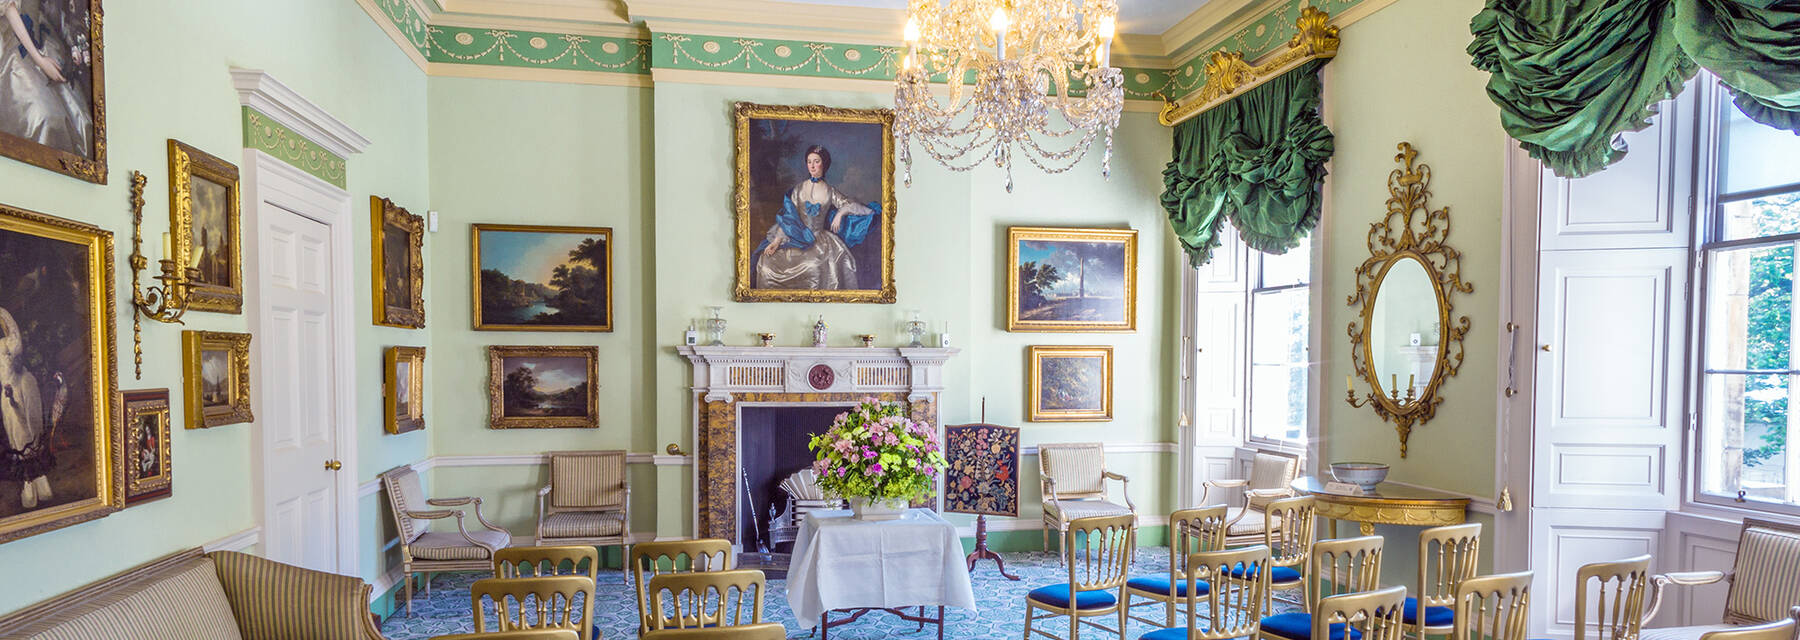 The drawing room in the Georgian House set up for a wedding